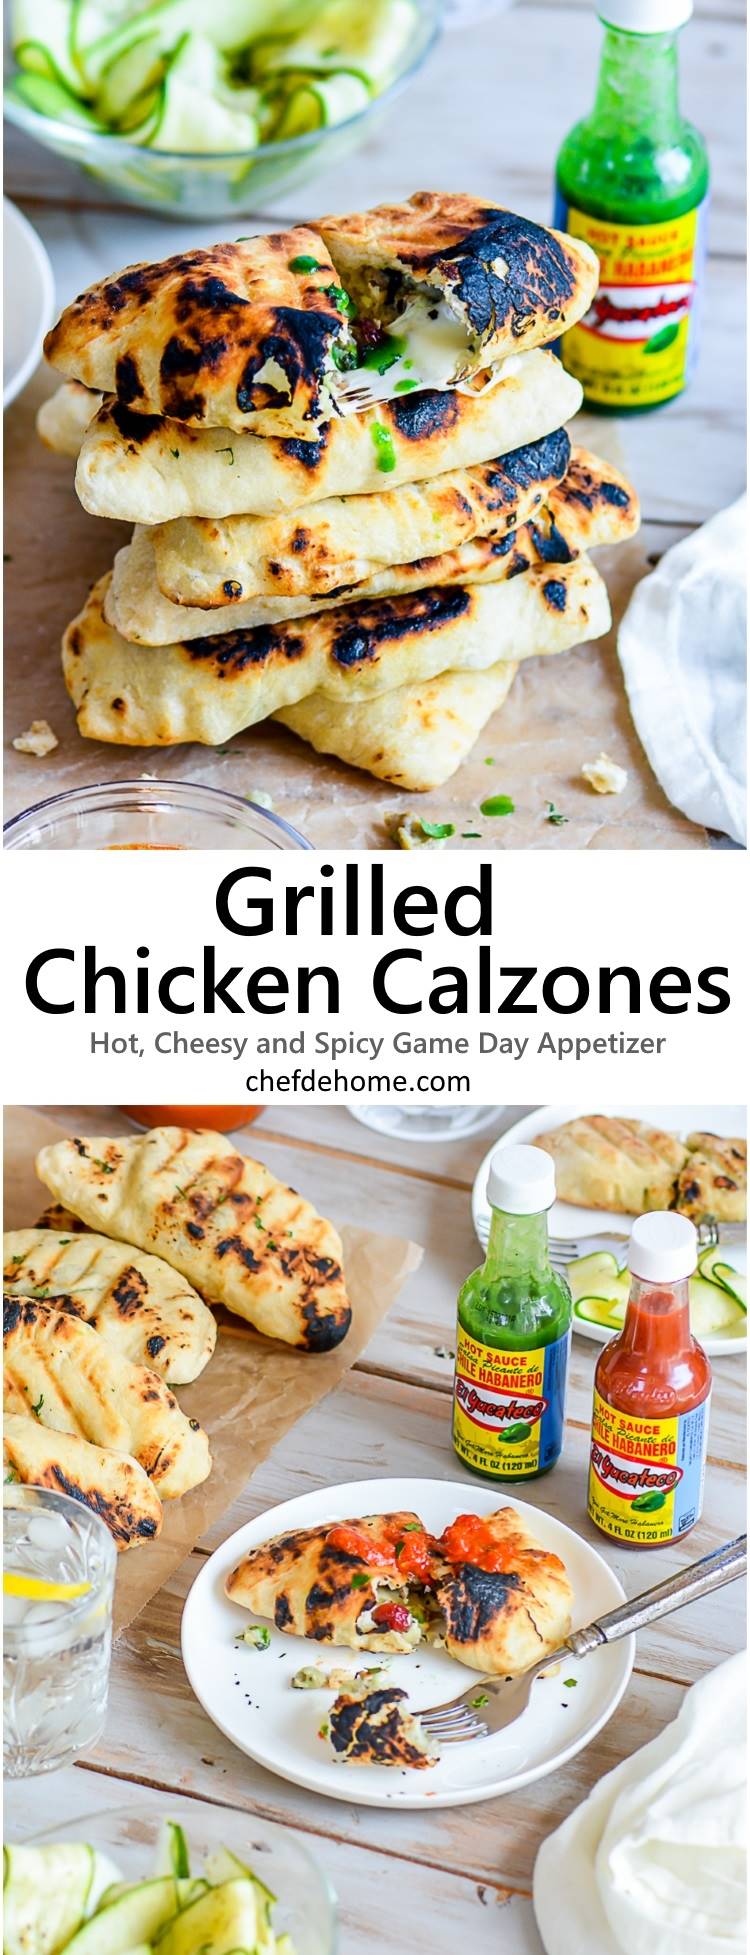 Easy Homemade Grilled Hot Cheesy Chicken Calzones served with Marinara Sauce for hosting Game Day party | chefdehome.com